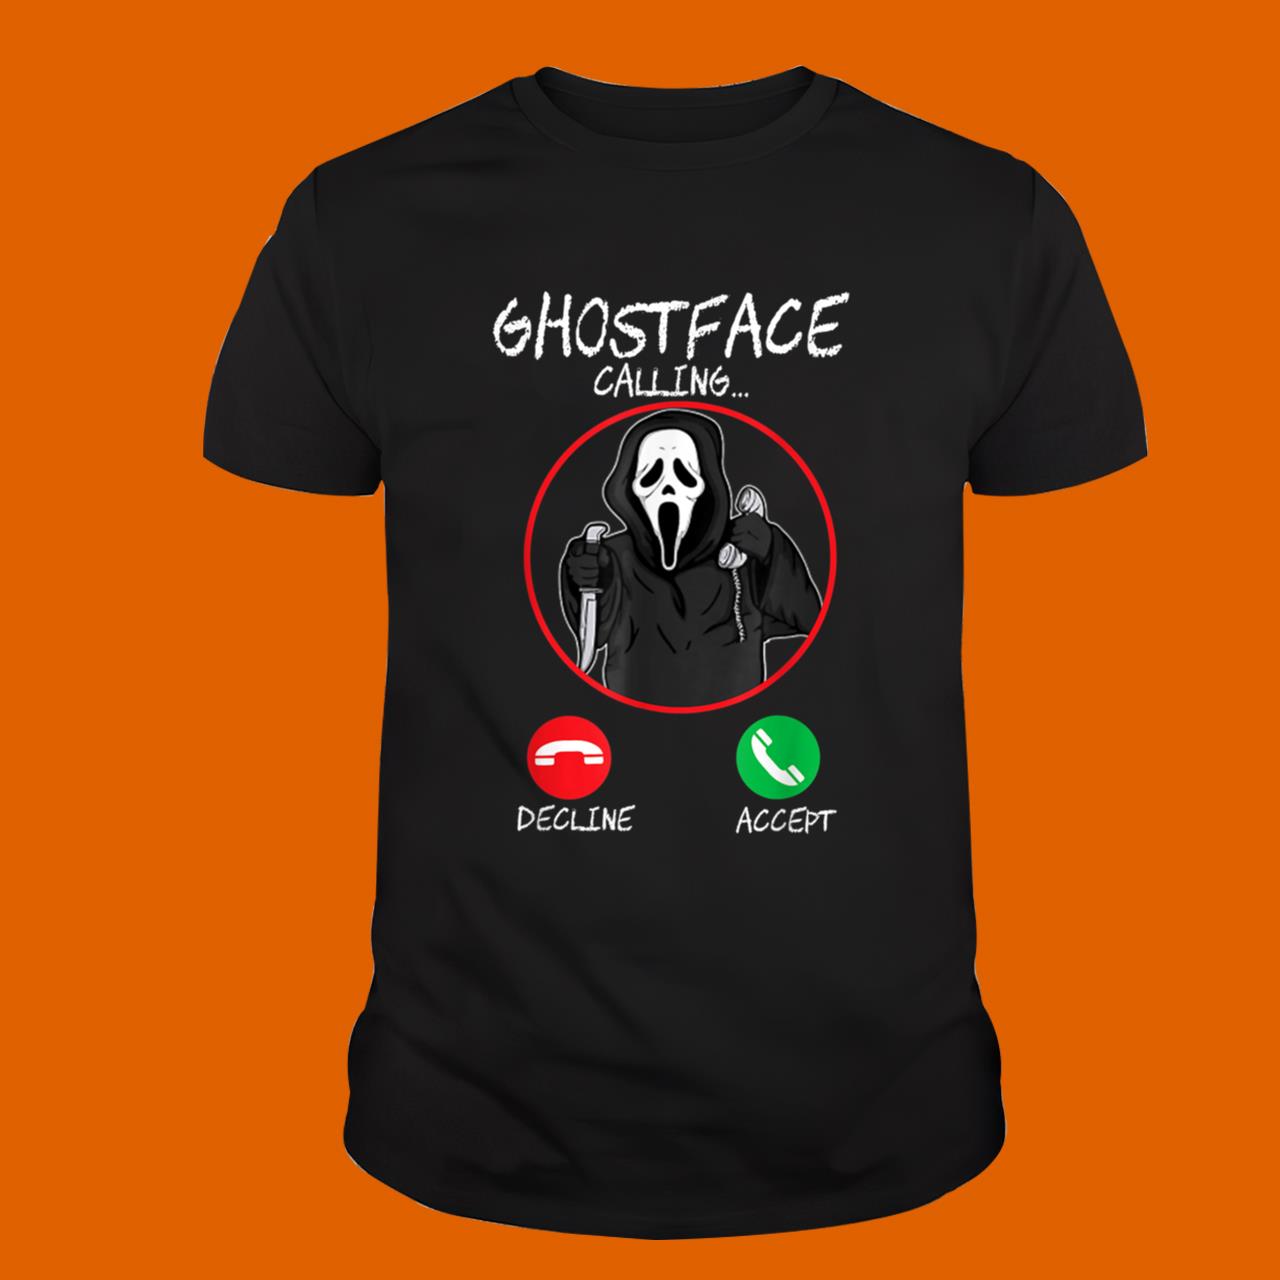 Holiday 365 Halloween Ghost Face Calling T-Shirt